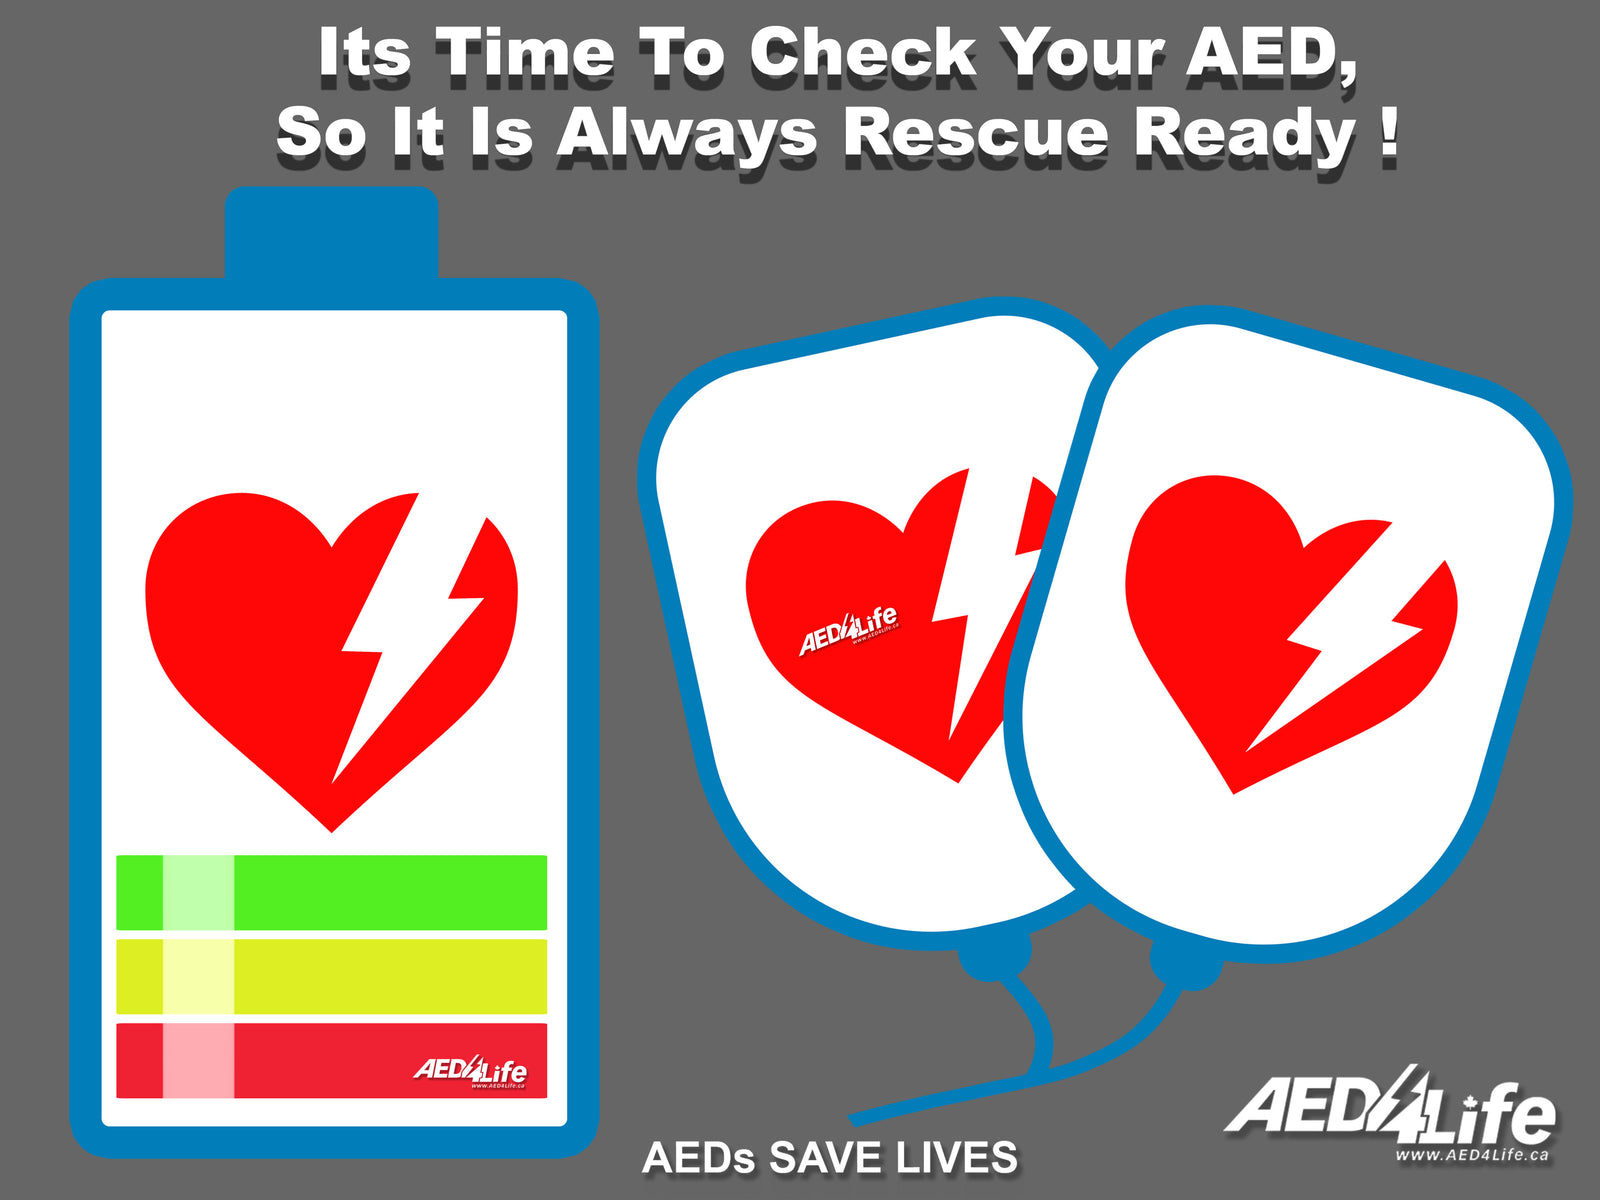 How To Check An AED with Trackmyaed